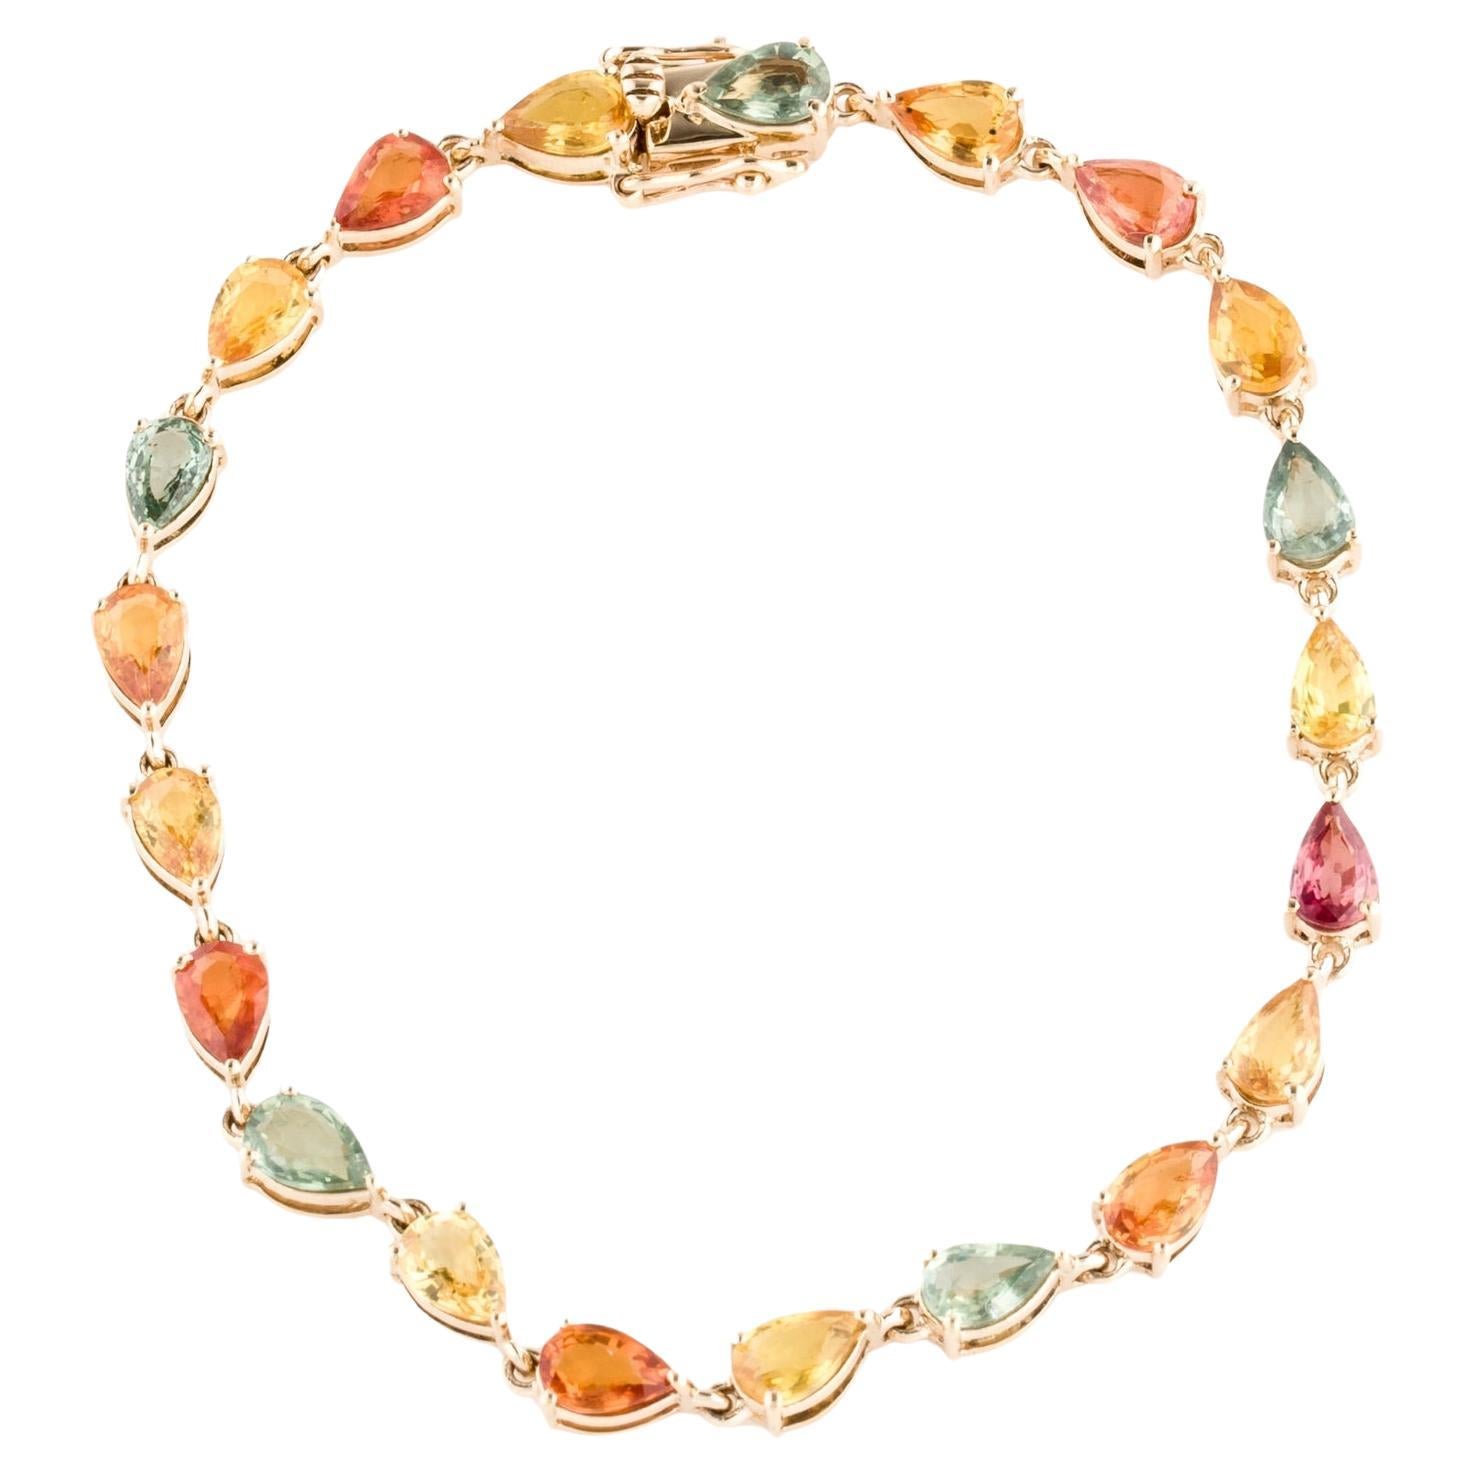 14K Yellow Gold Sapphire Link Bracelet, 9.90ct Multi-Colored Sapphires